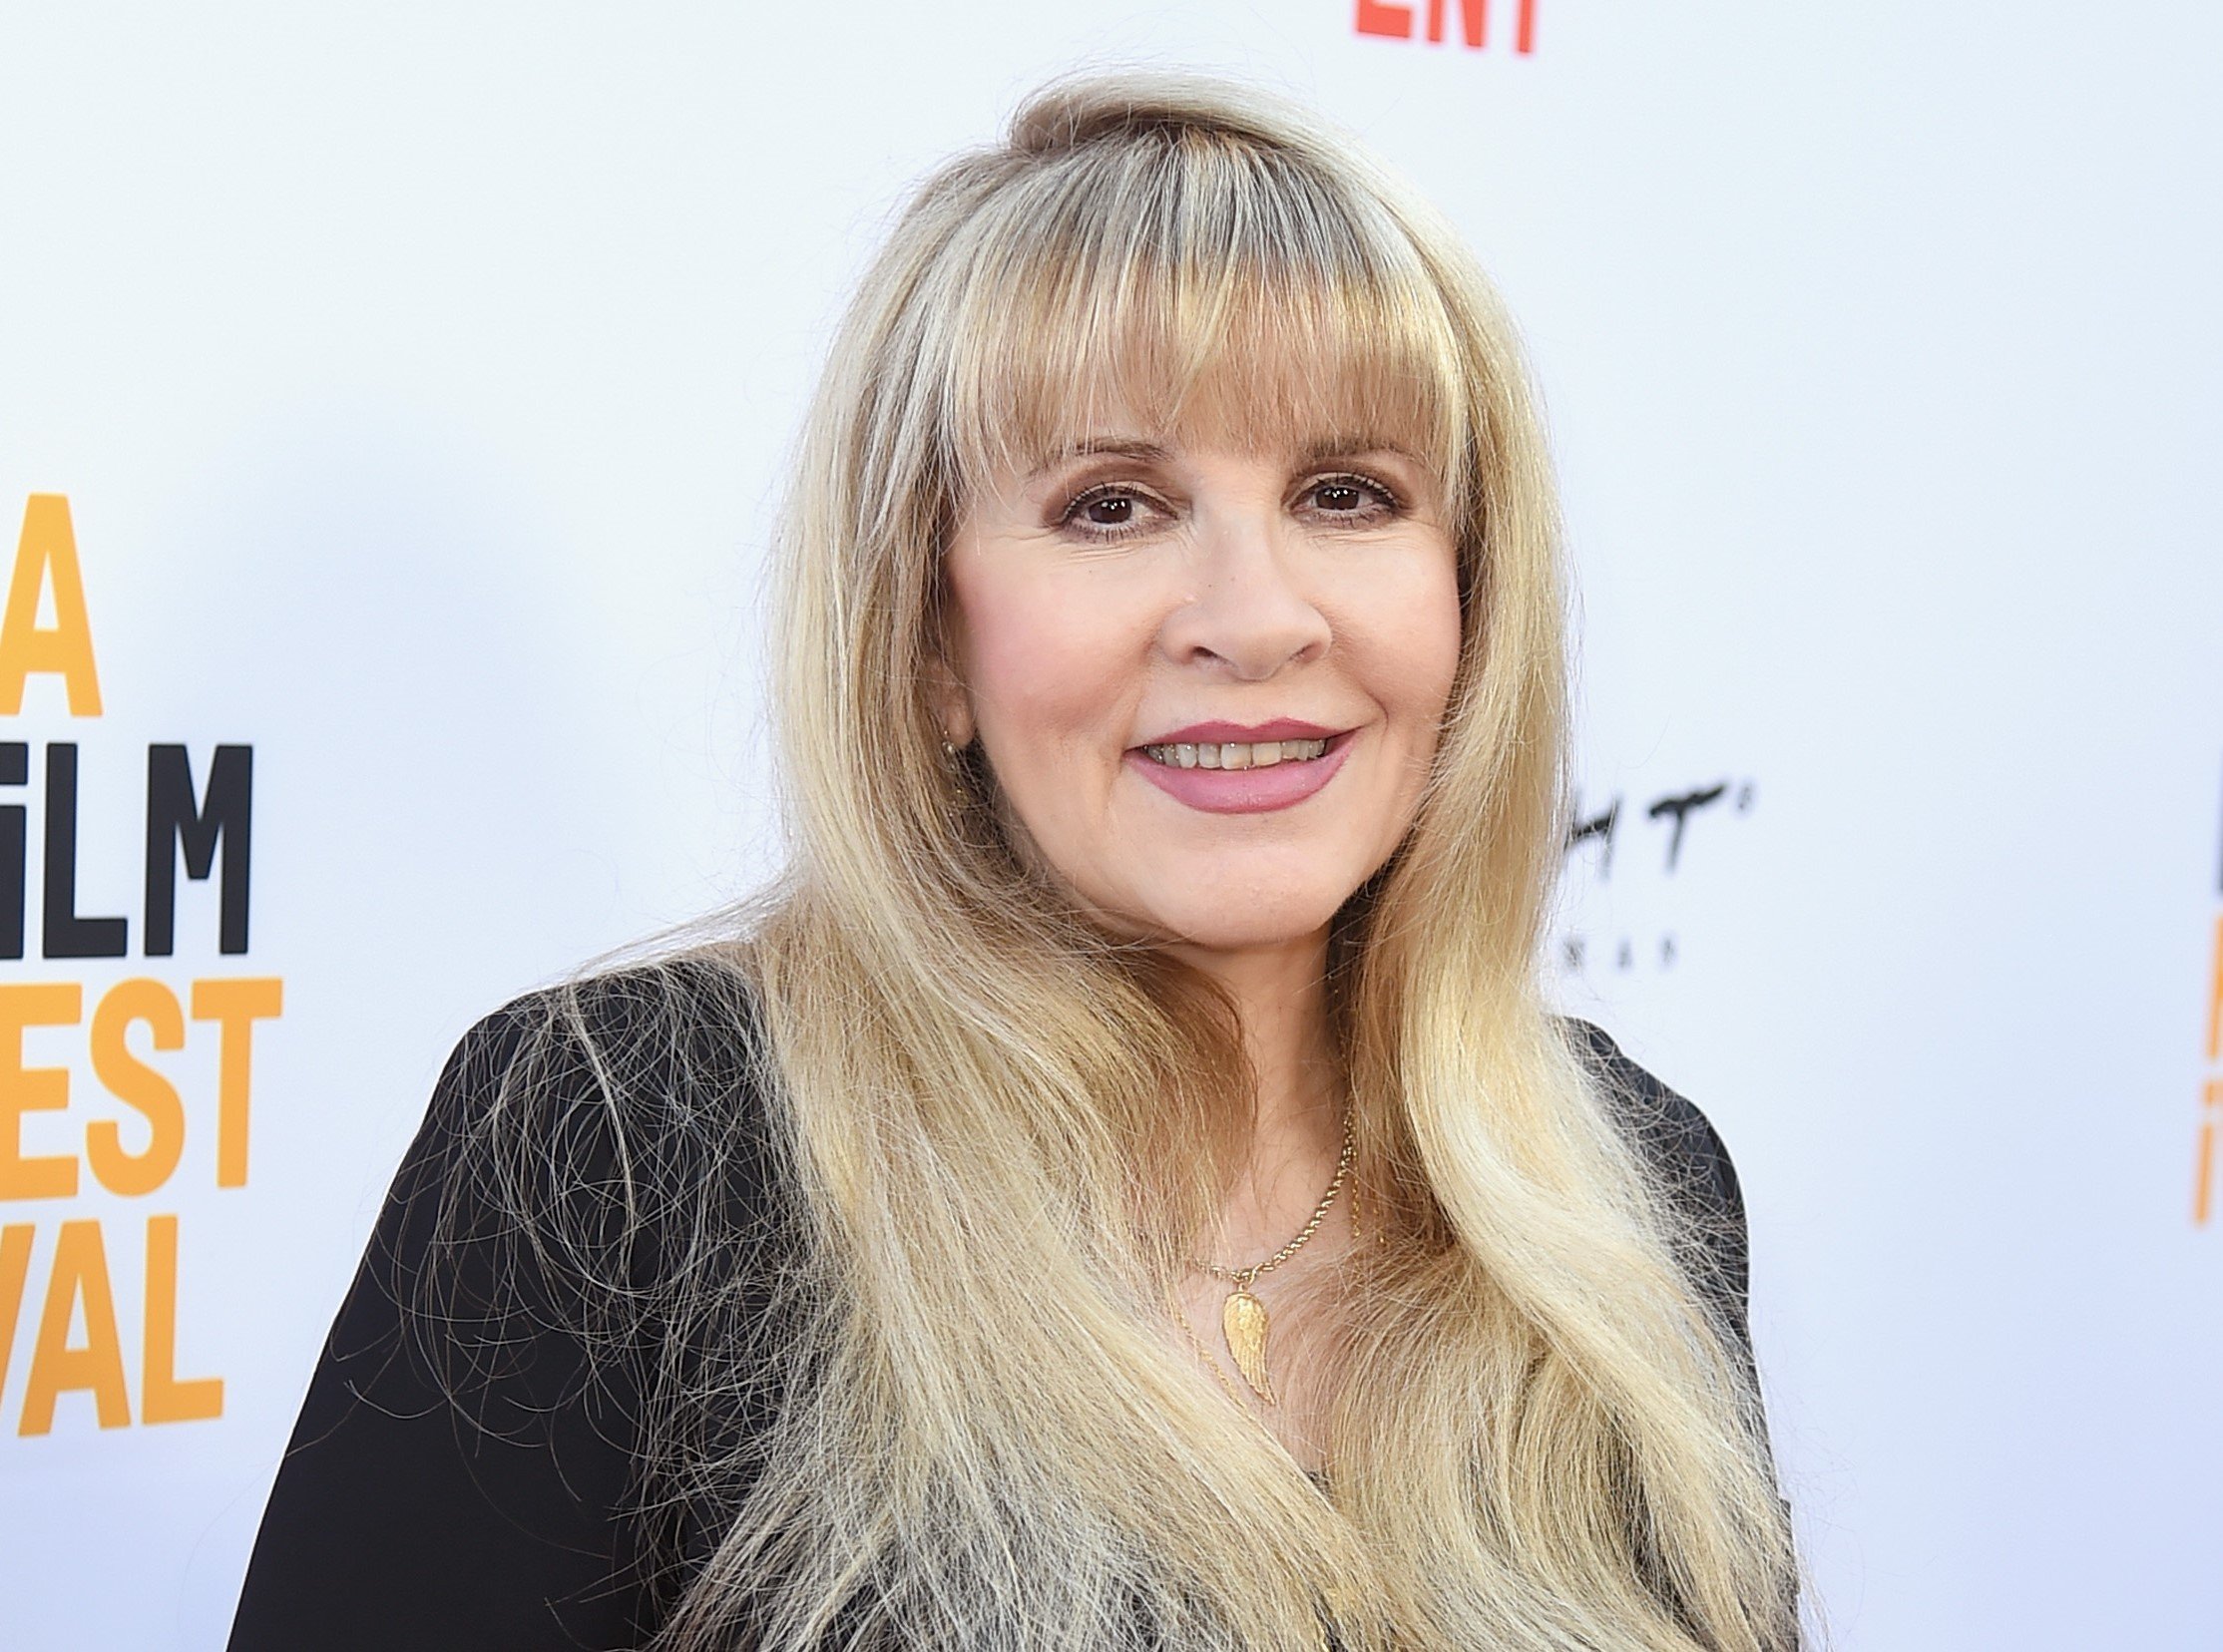 Stevie Nicks wears a black shirt and stands in front of a white background.